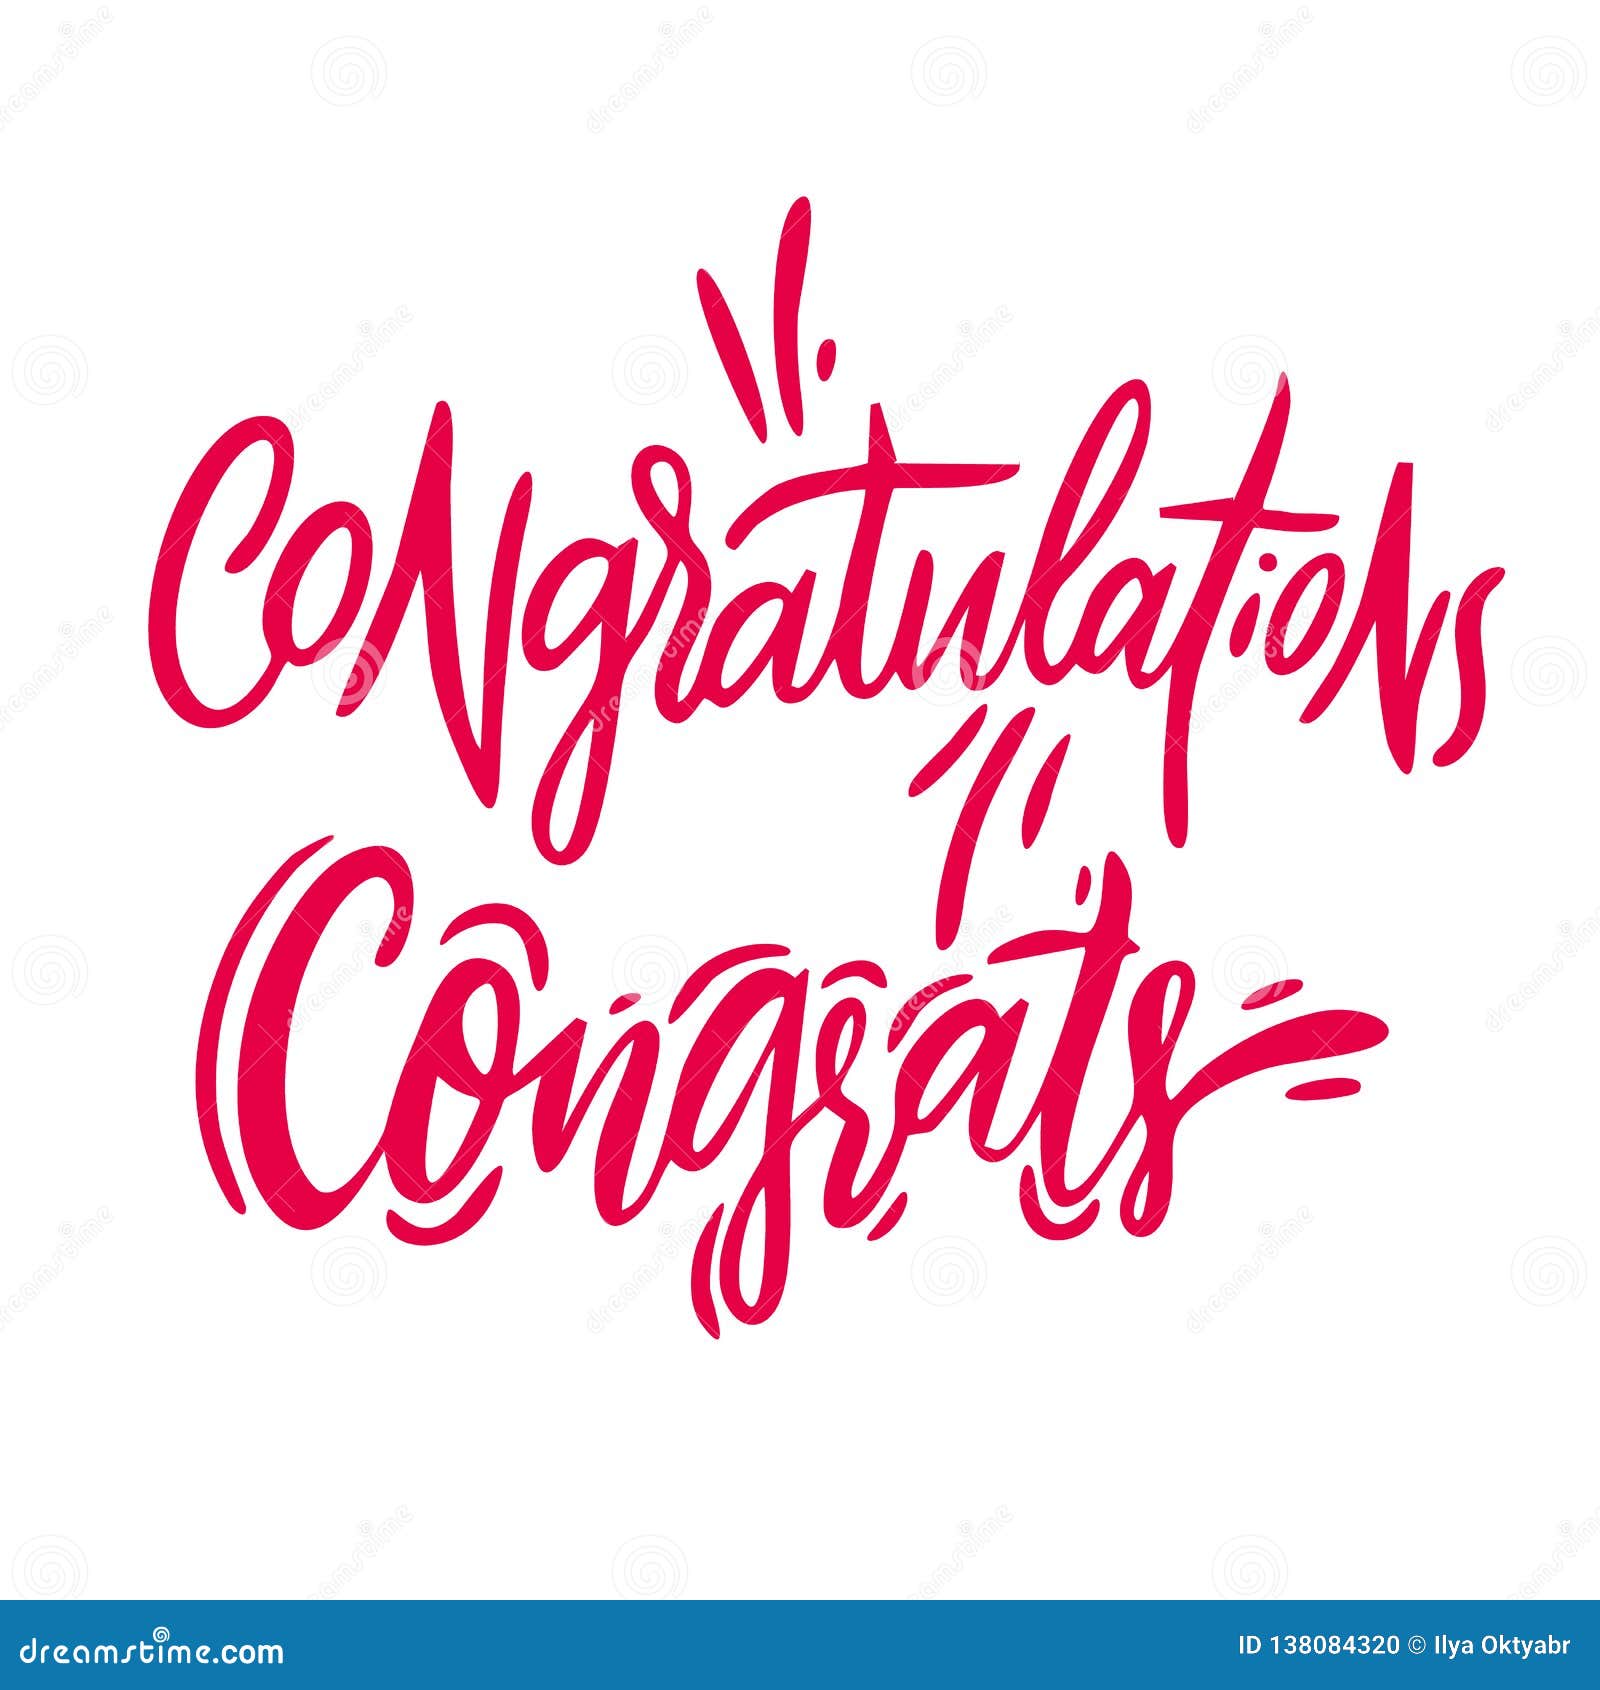 Congrats Hand Drawn Vector Lettering Modern Brush Calligraphy